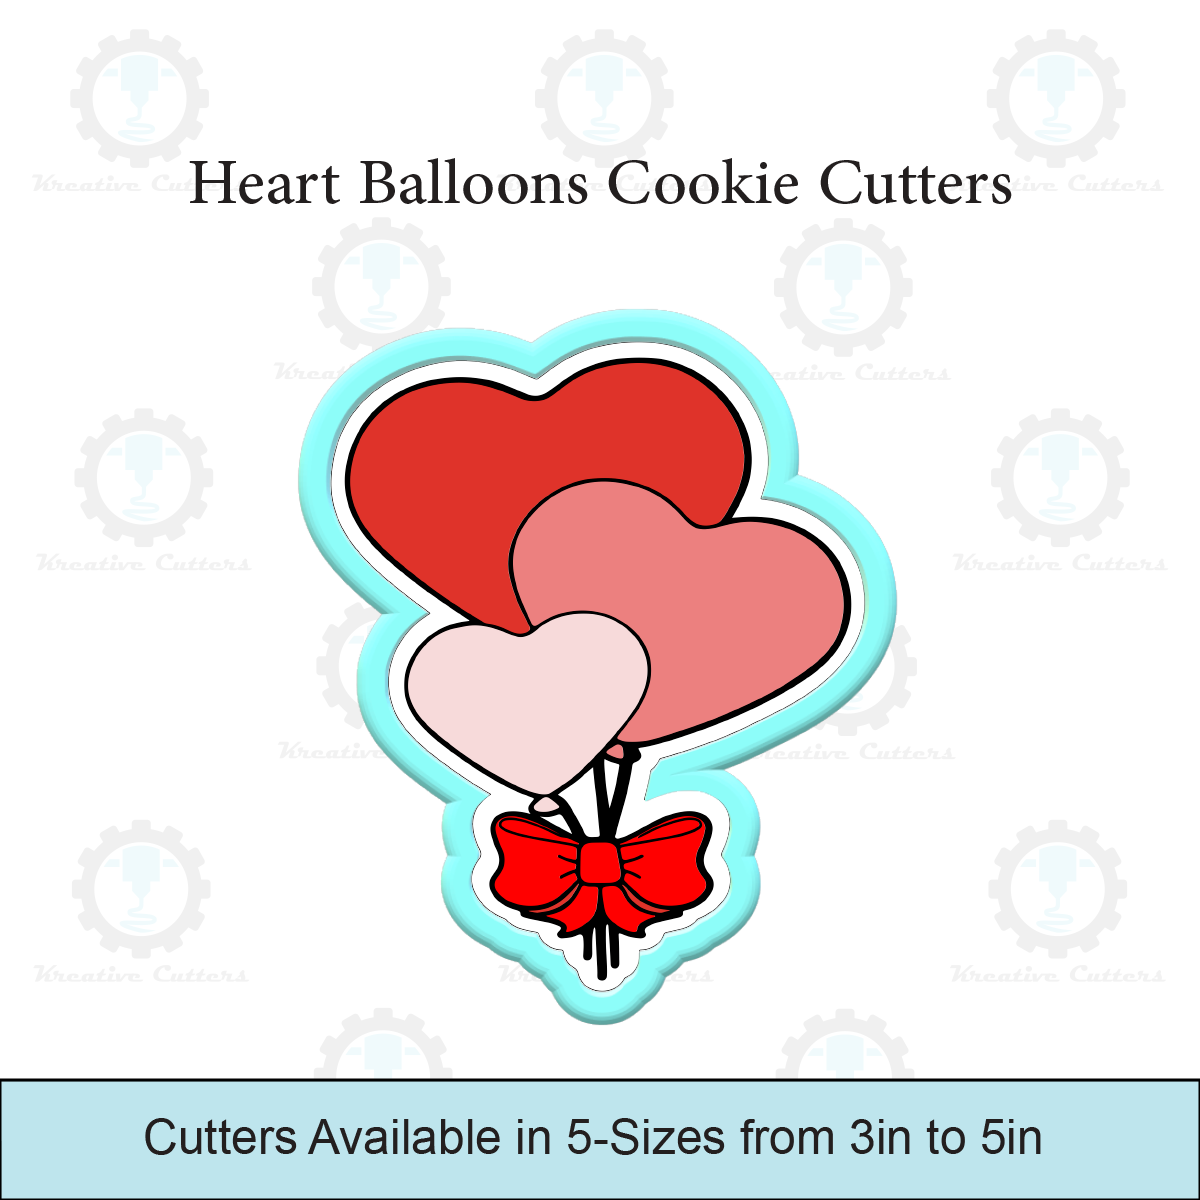 Heart Balloons Cookie Cutters